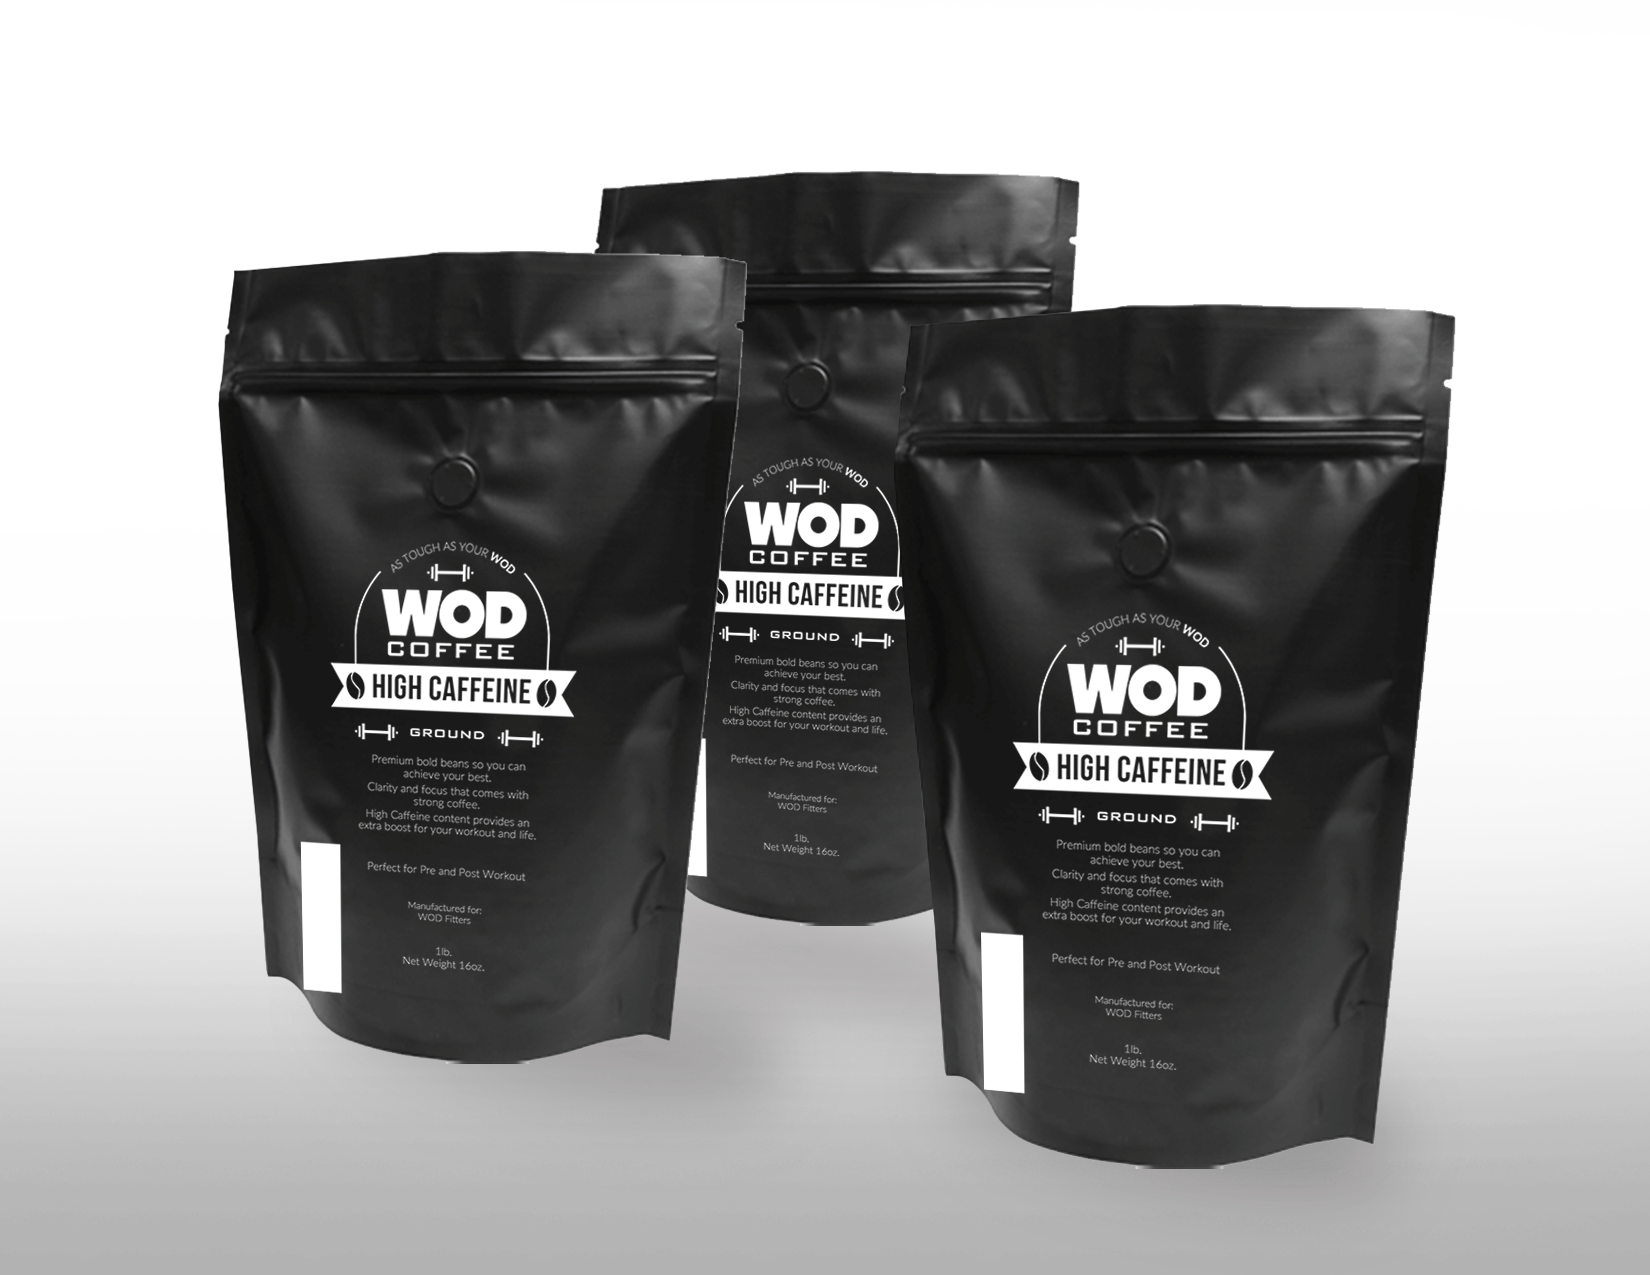 Coffee - WOD Coffee - The Strongest, Boldest Coffee To Set PRs In Your Workouts And Your Life